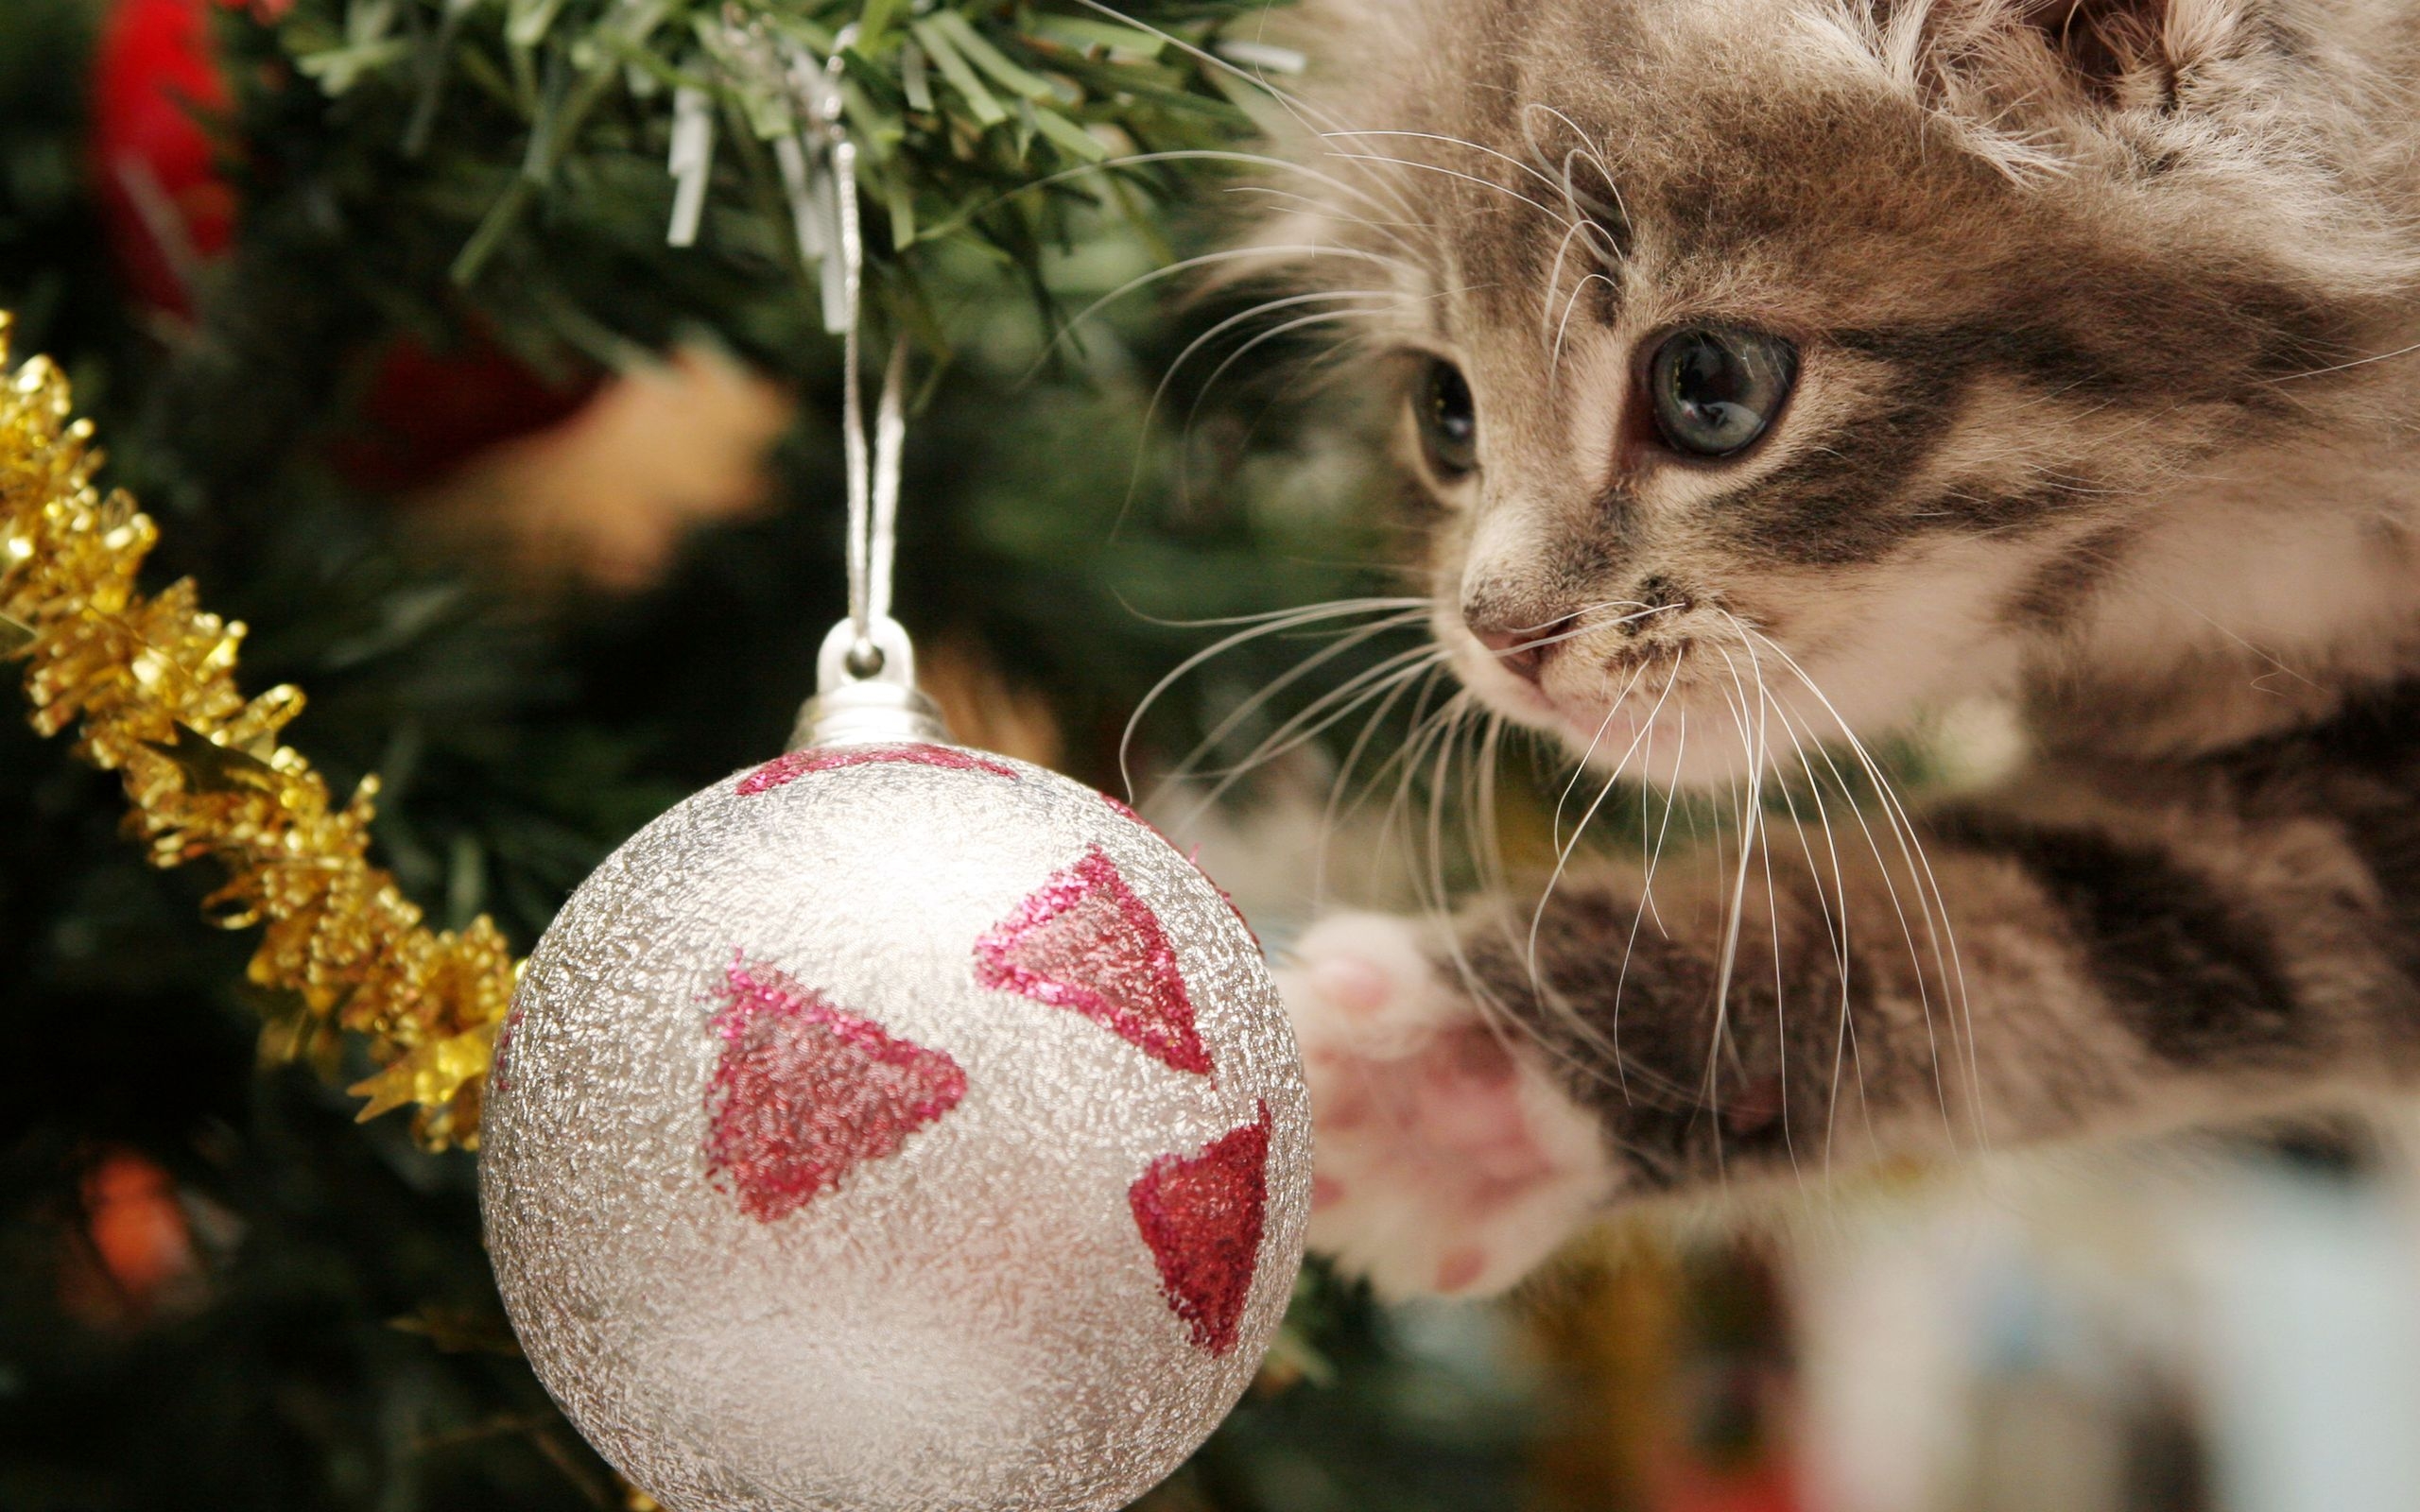 Ball And A Kitten Wallpaper Image Pictures Photos